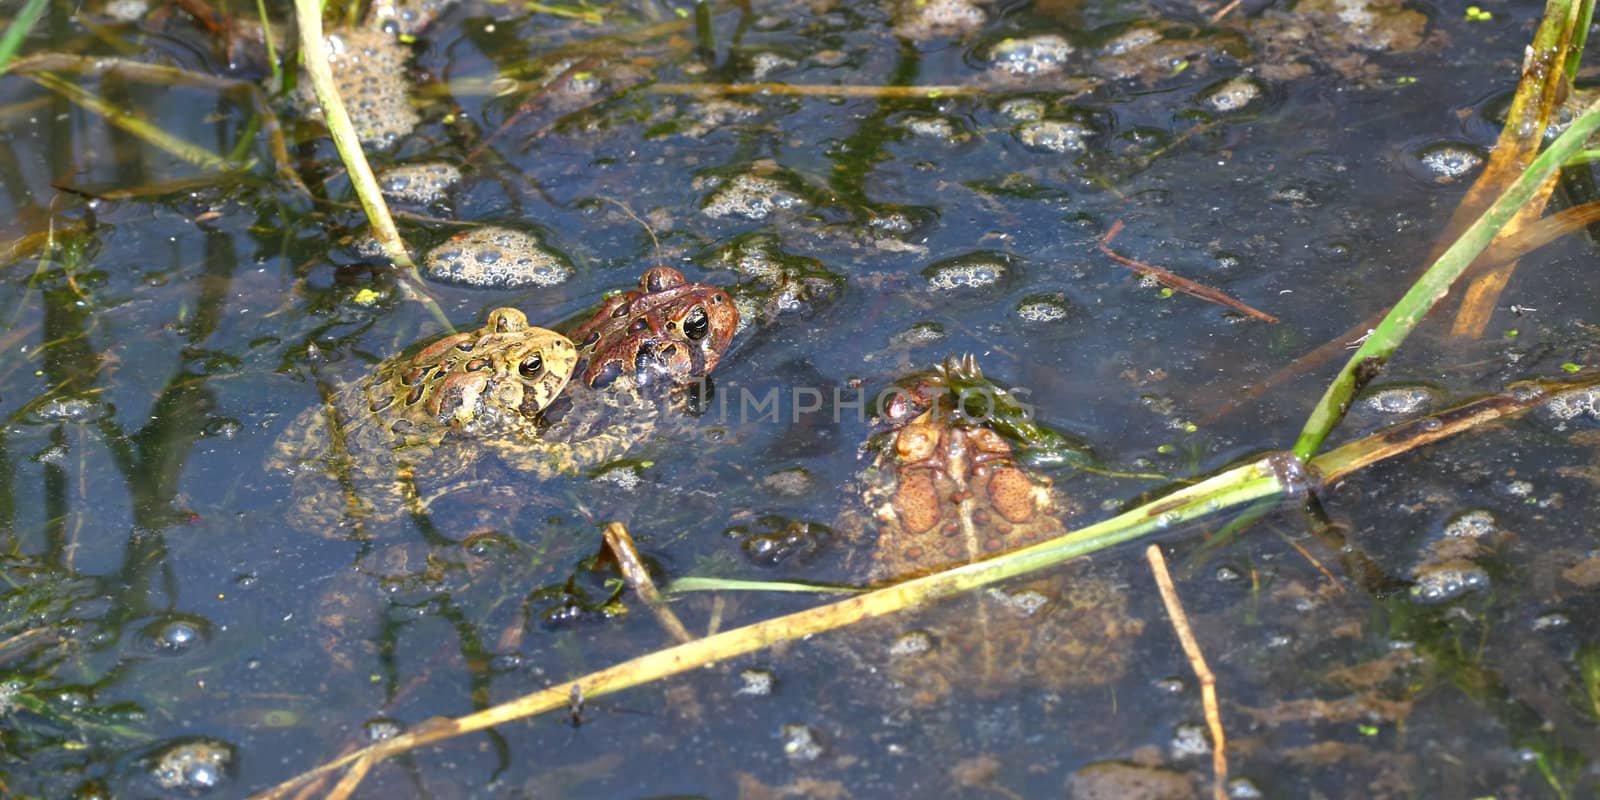 American Toad (Bufo americanus) by Wirepec